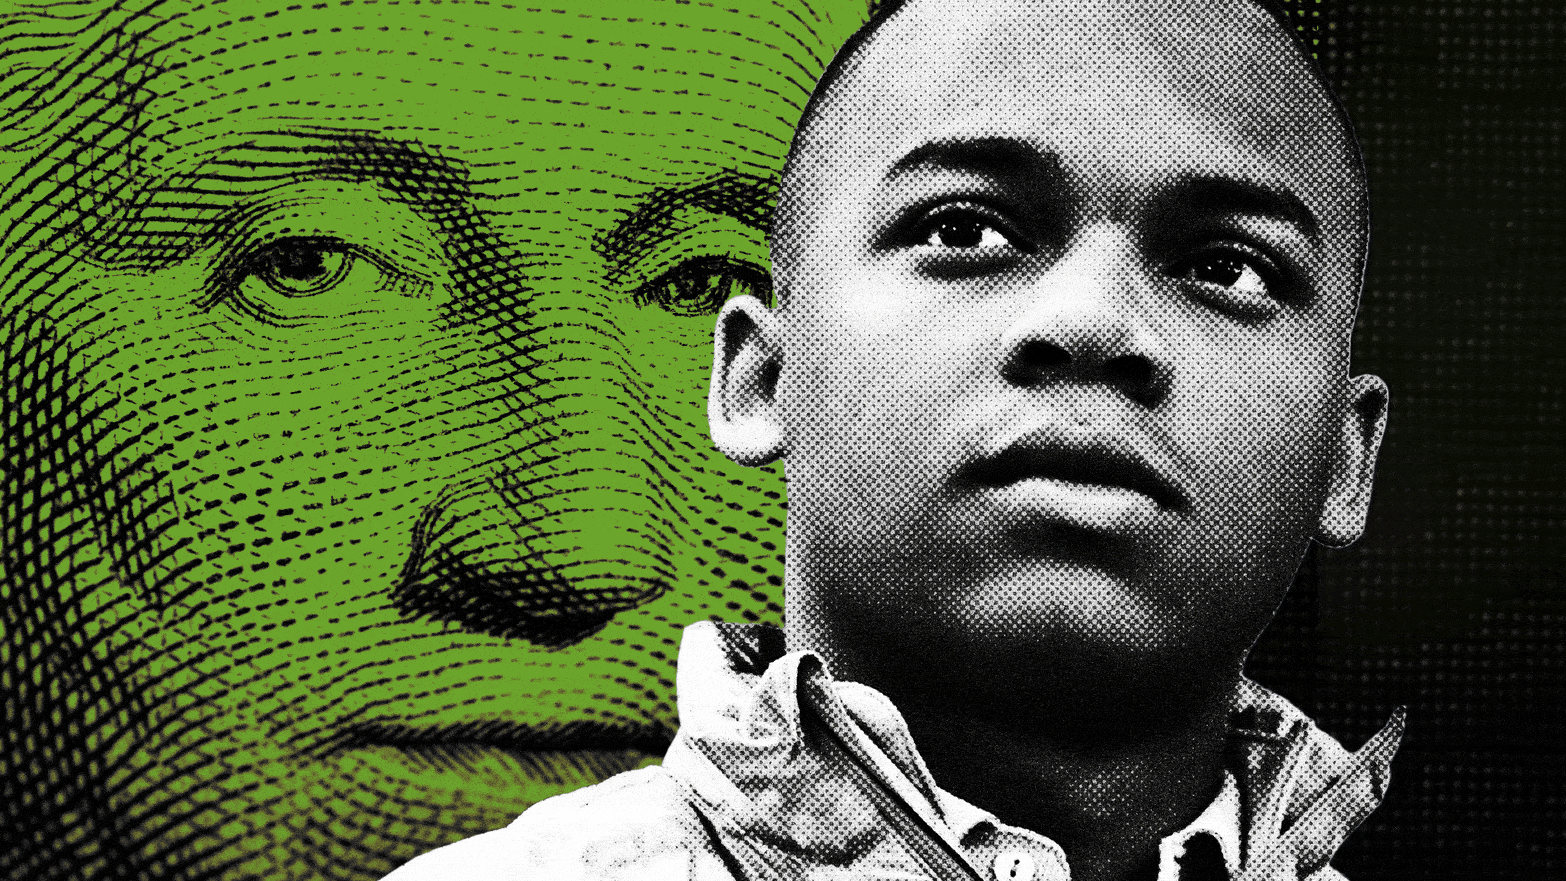 Illustration of CJ Pearson in front of image of George Washington on $1 bill.